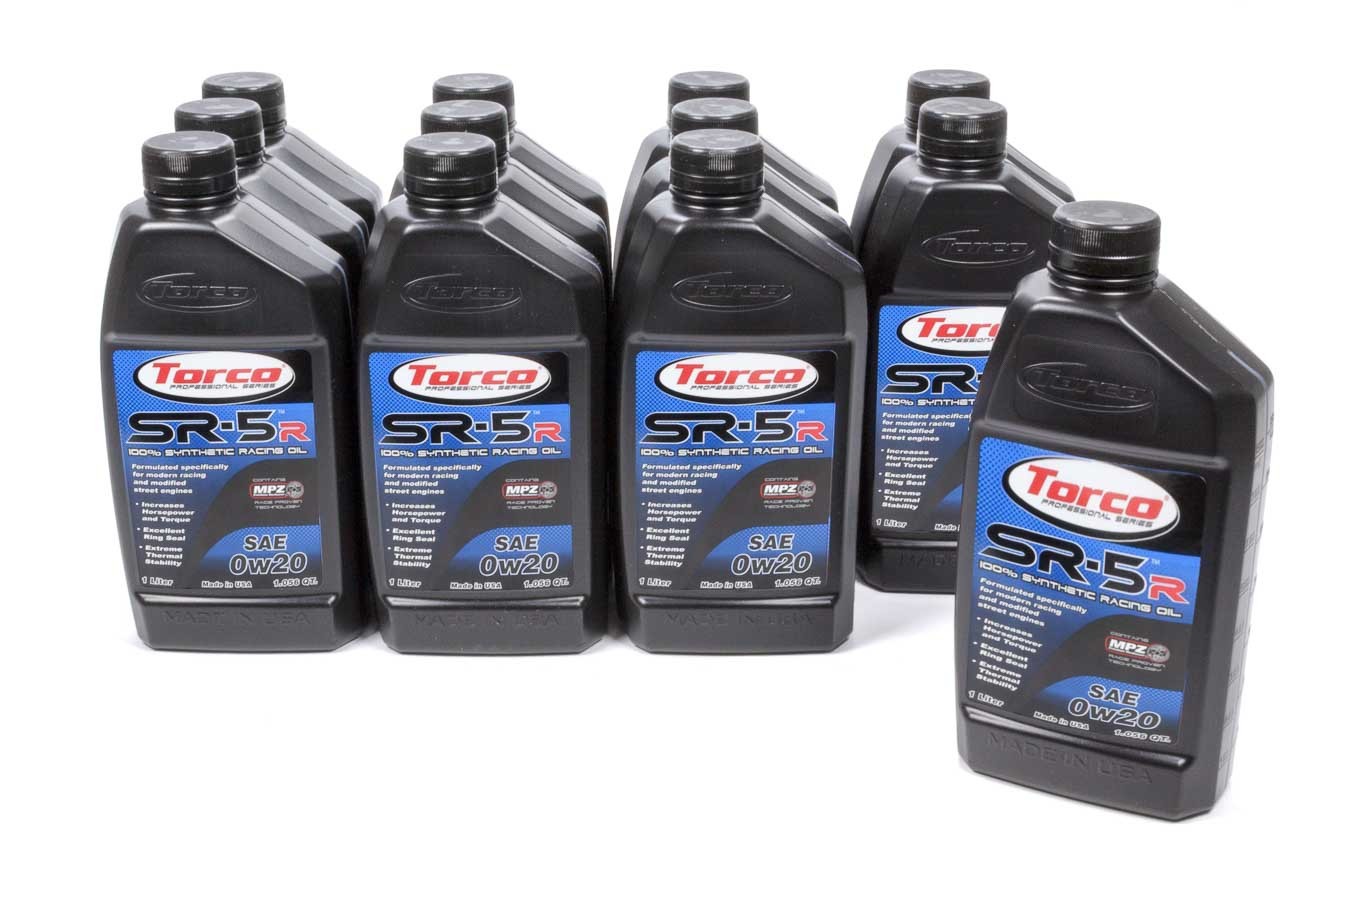 Torco Oil, SR-5R Synthetic Racing Oil 0w20 Case 12x1-Liter